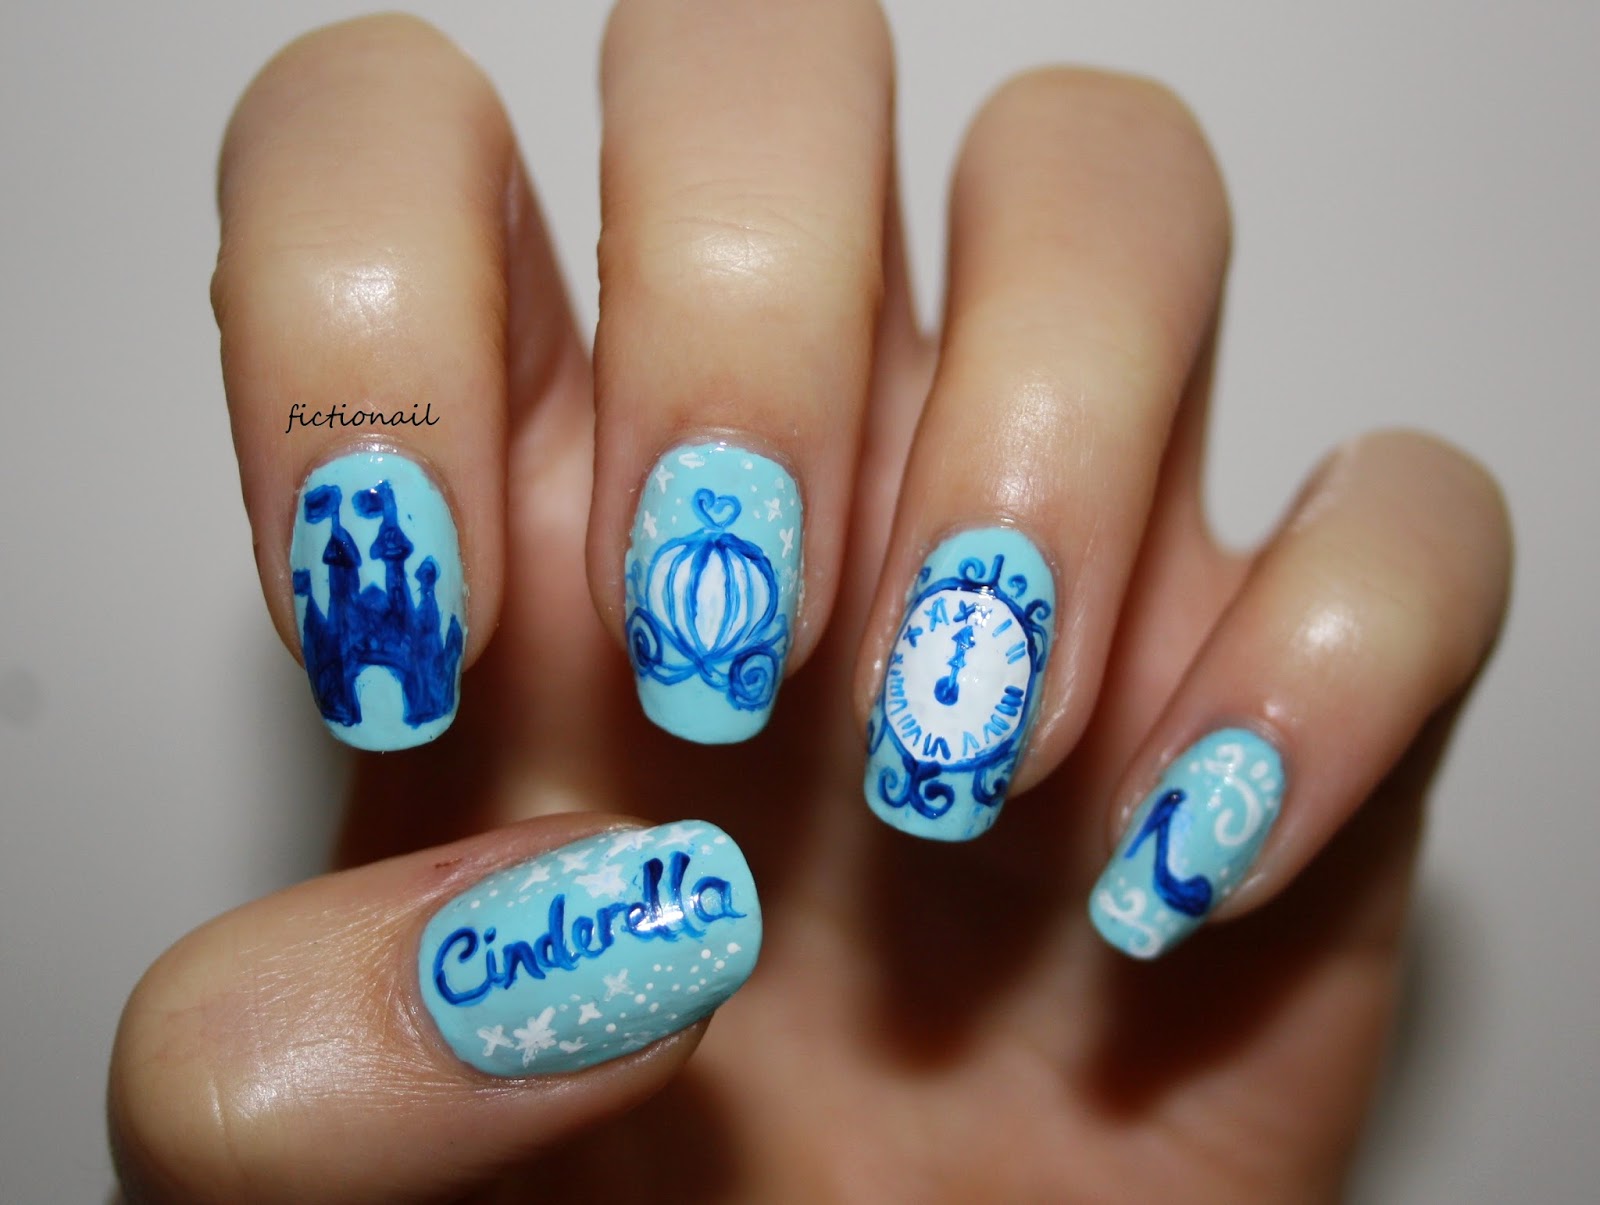 3. Cinderella Themed Acrylic Nails - wide 3